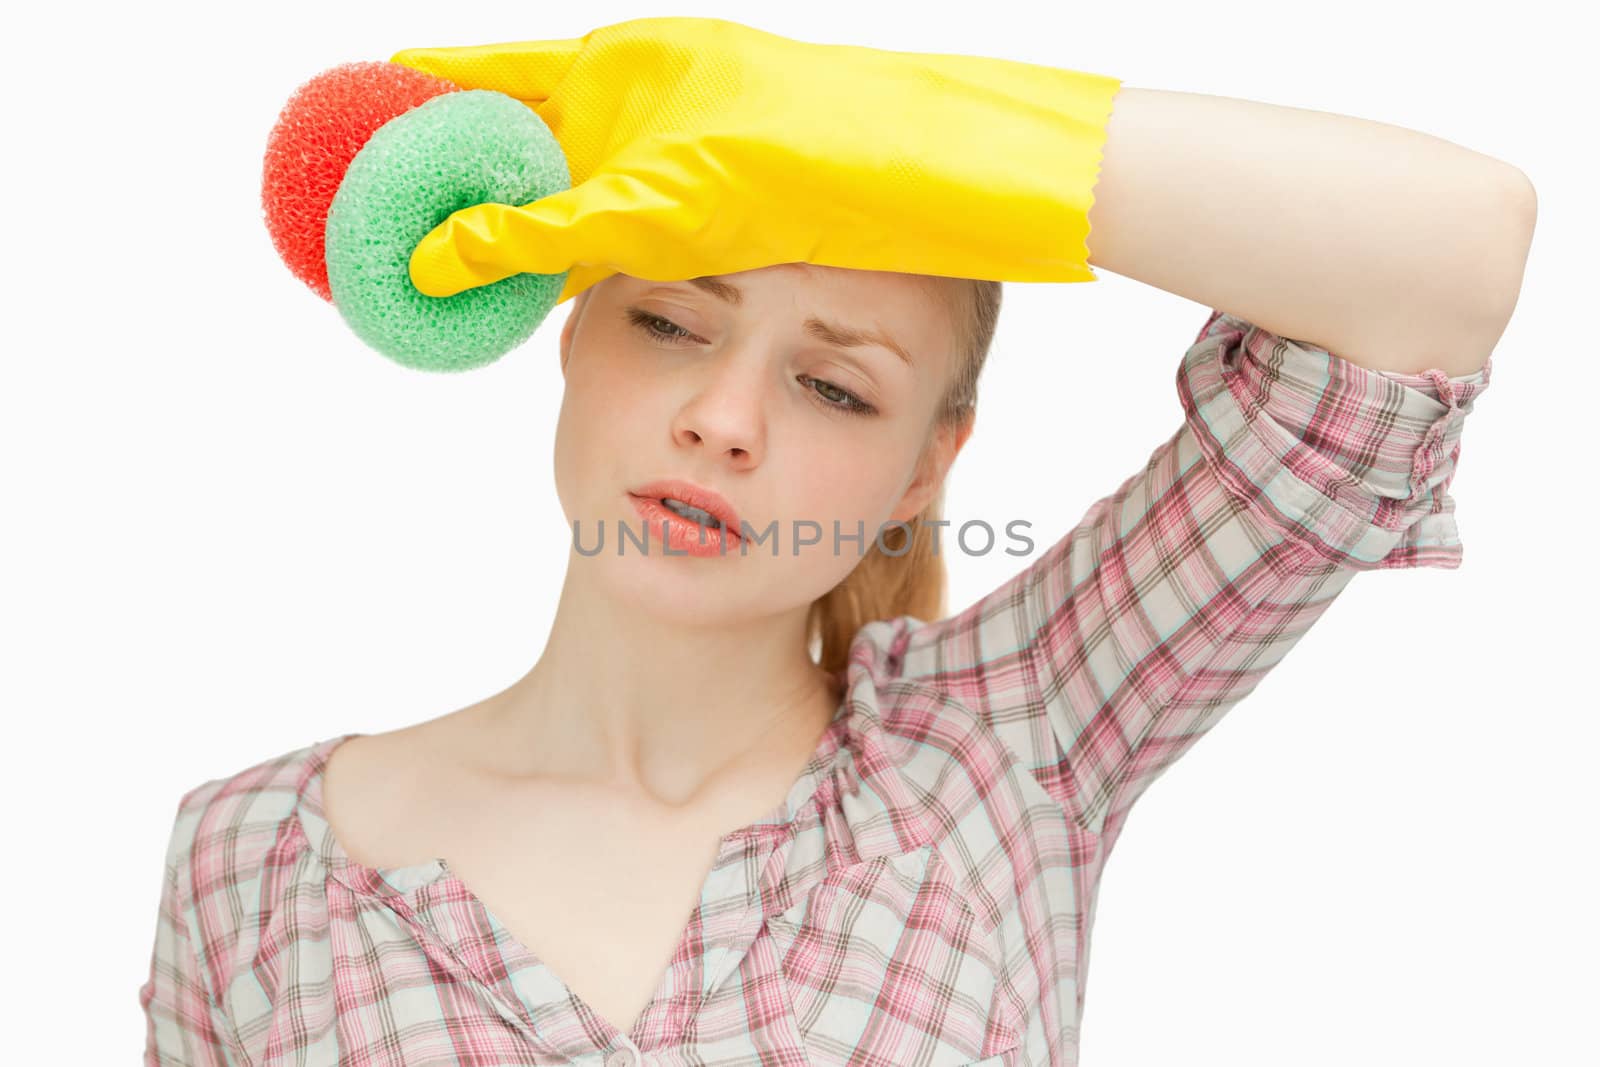 Woman wiping her forehead while holding sponges against white background